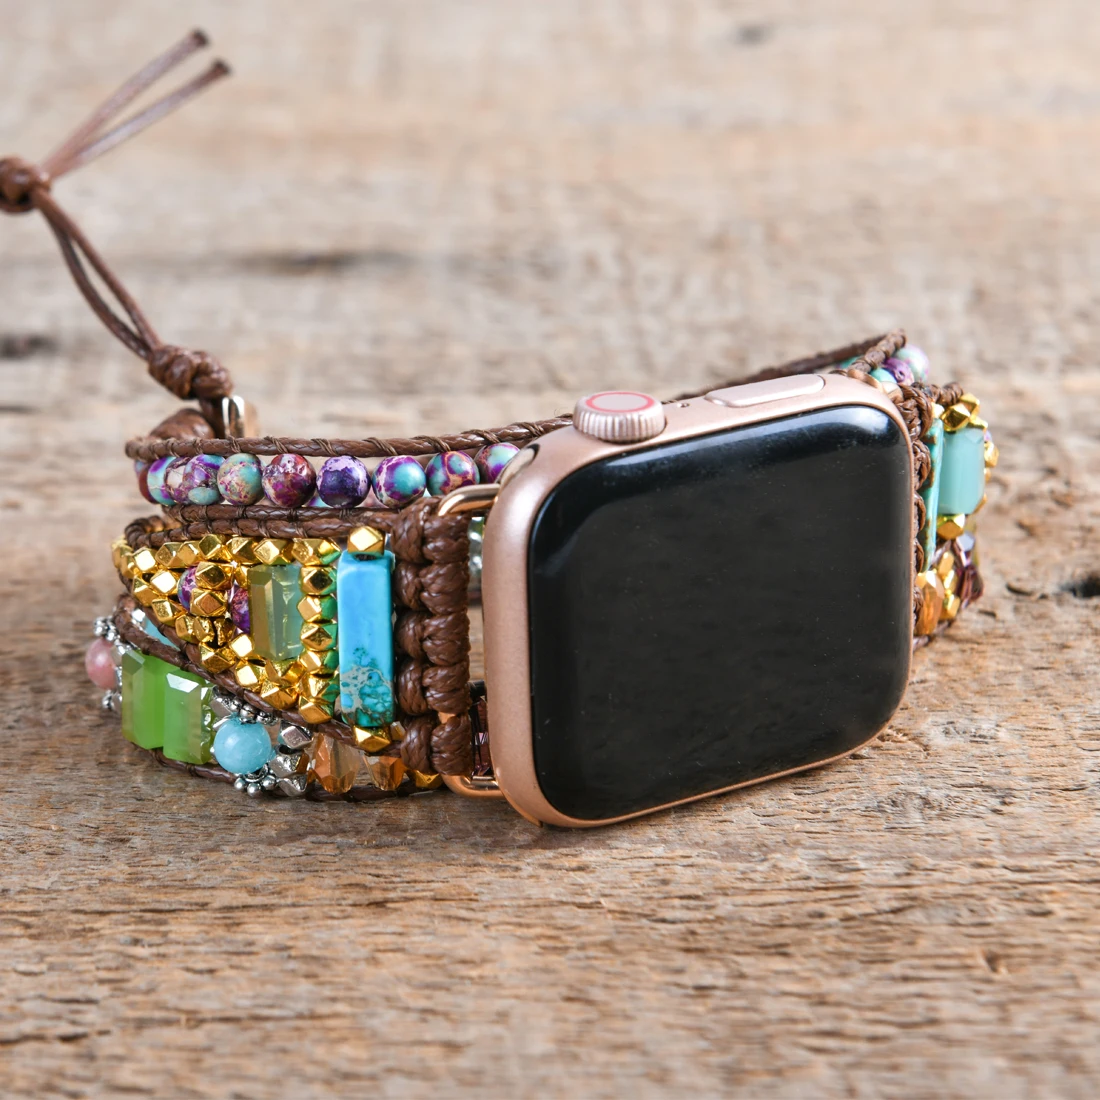 Boho Natural Stones Apple Watch Strap Boho Trendy Beaded Band Smartwatch Bracelet For Iwatch Series 1-7 Accessories